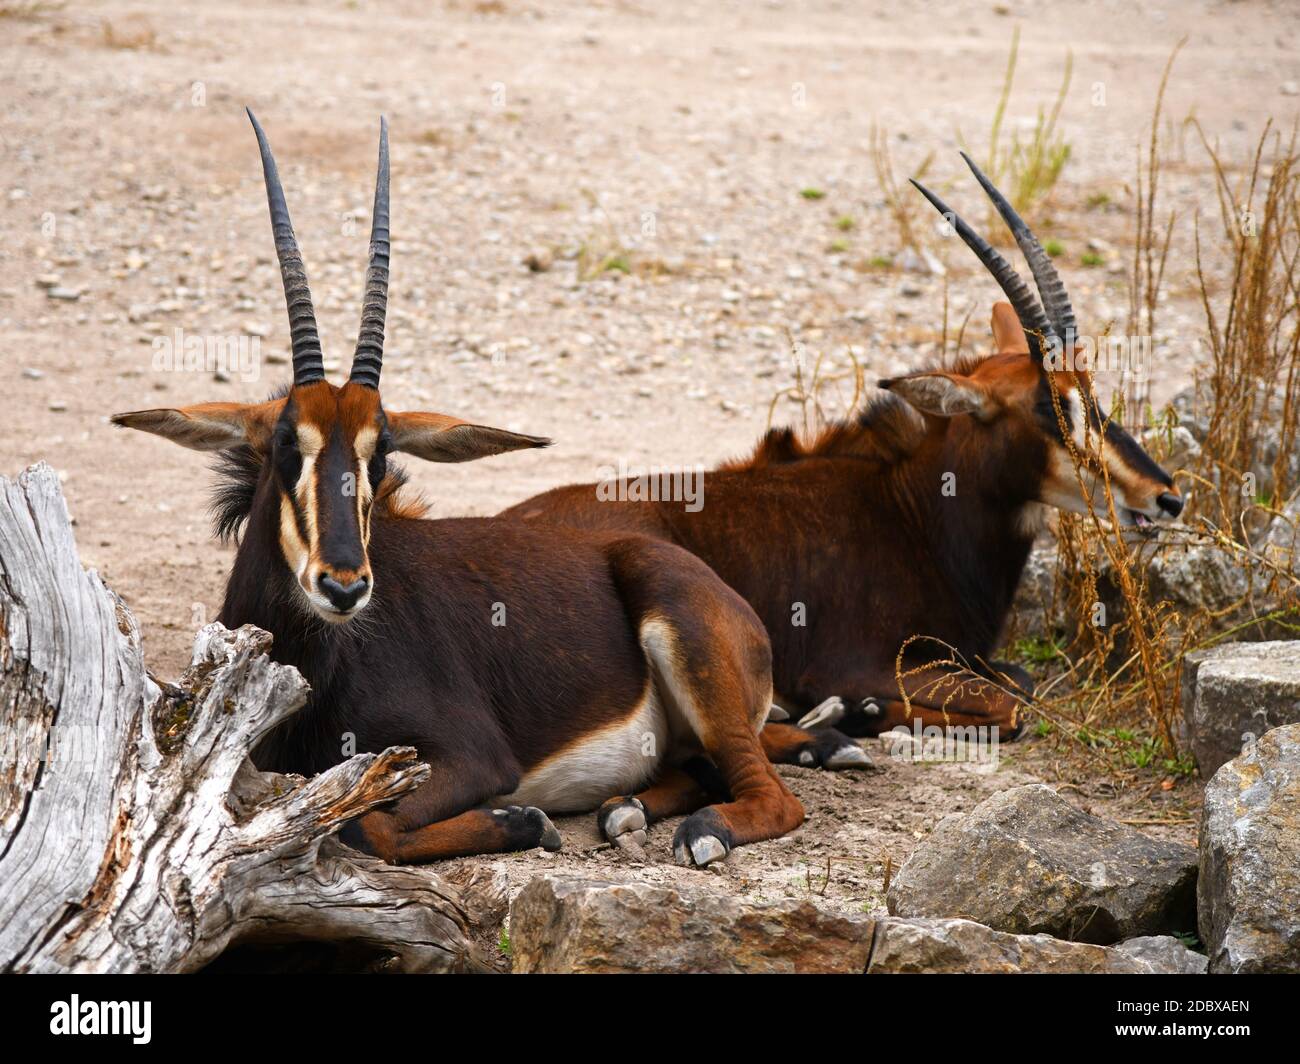 sable antelope in the zoo Stock Photo